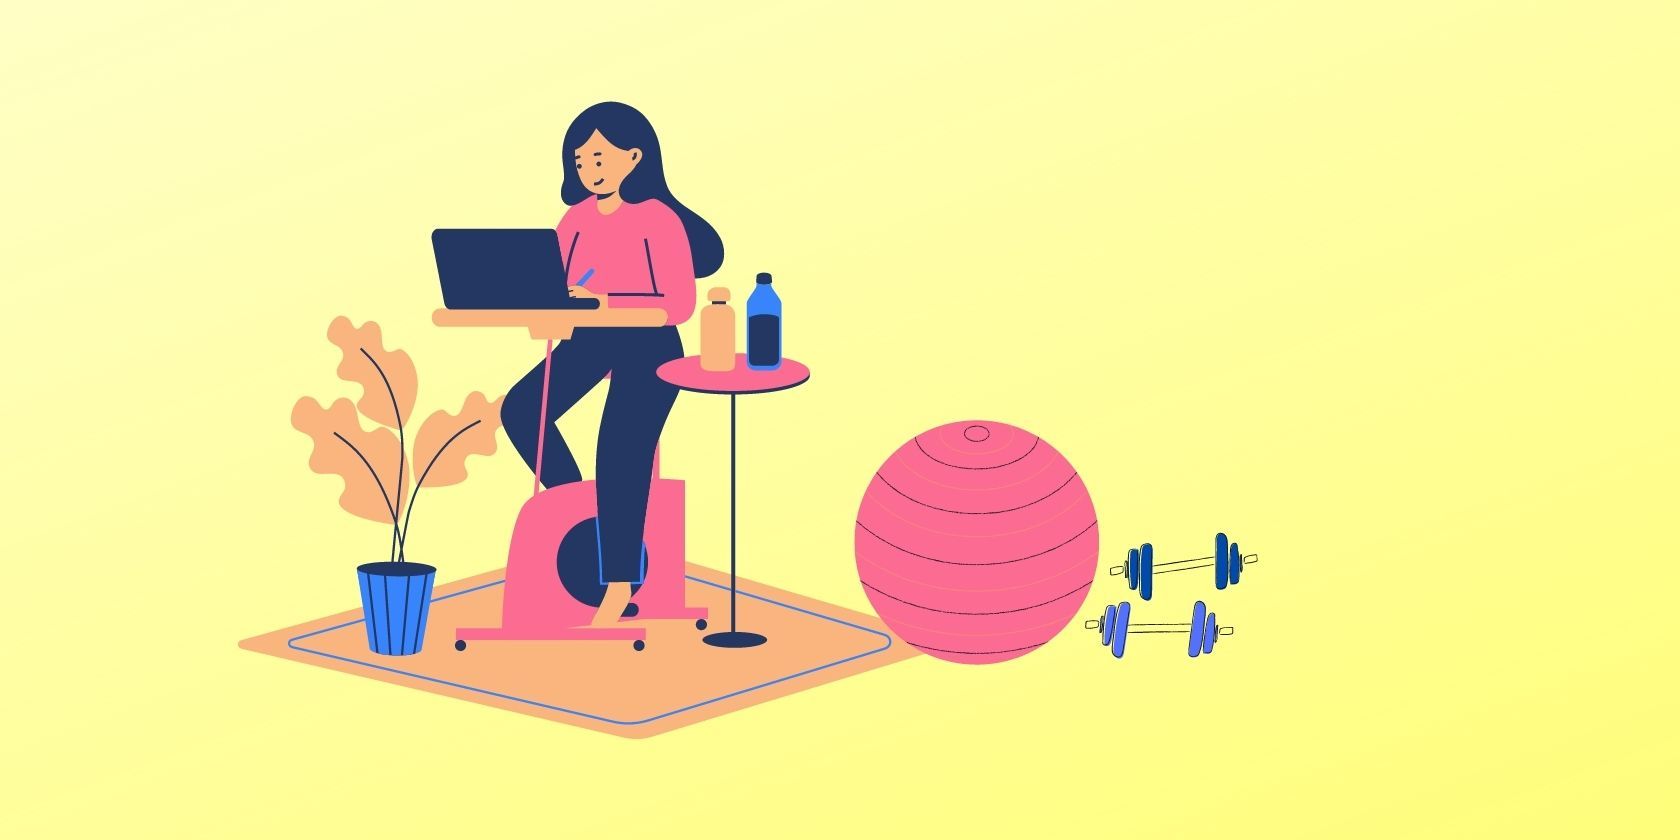 Illustration of Person Sat On Exercise Bike Desk With Dumbbells and Exercise Ball Next to Them